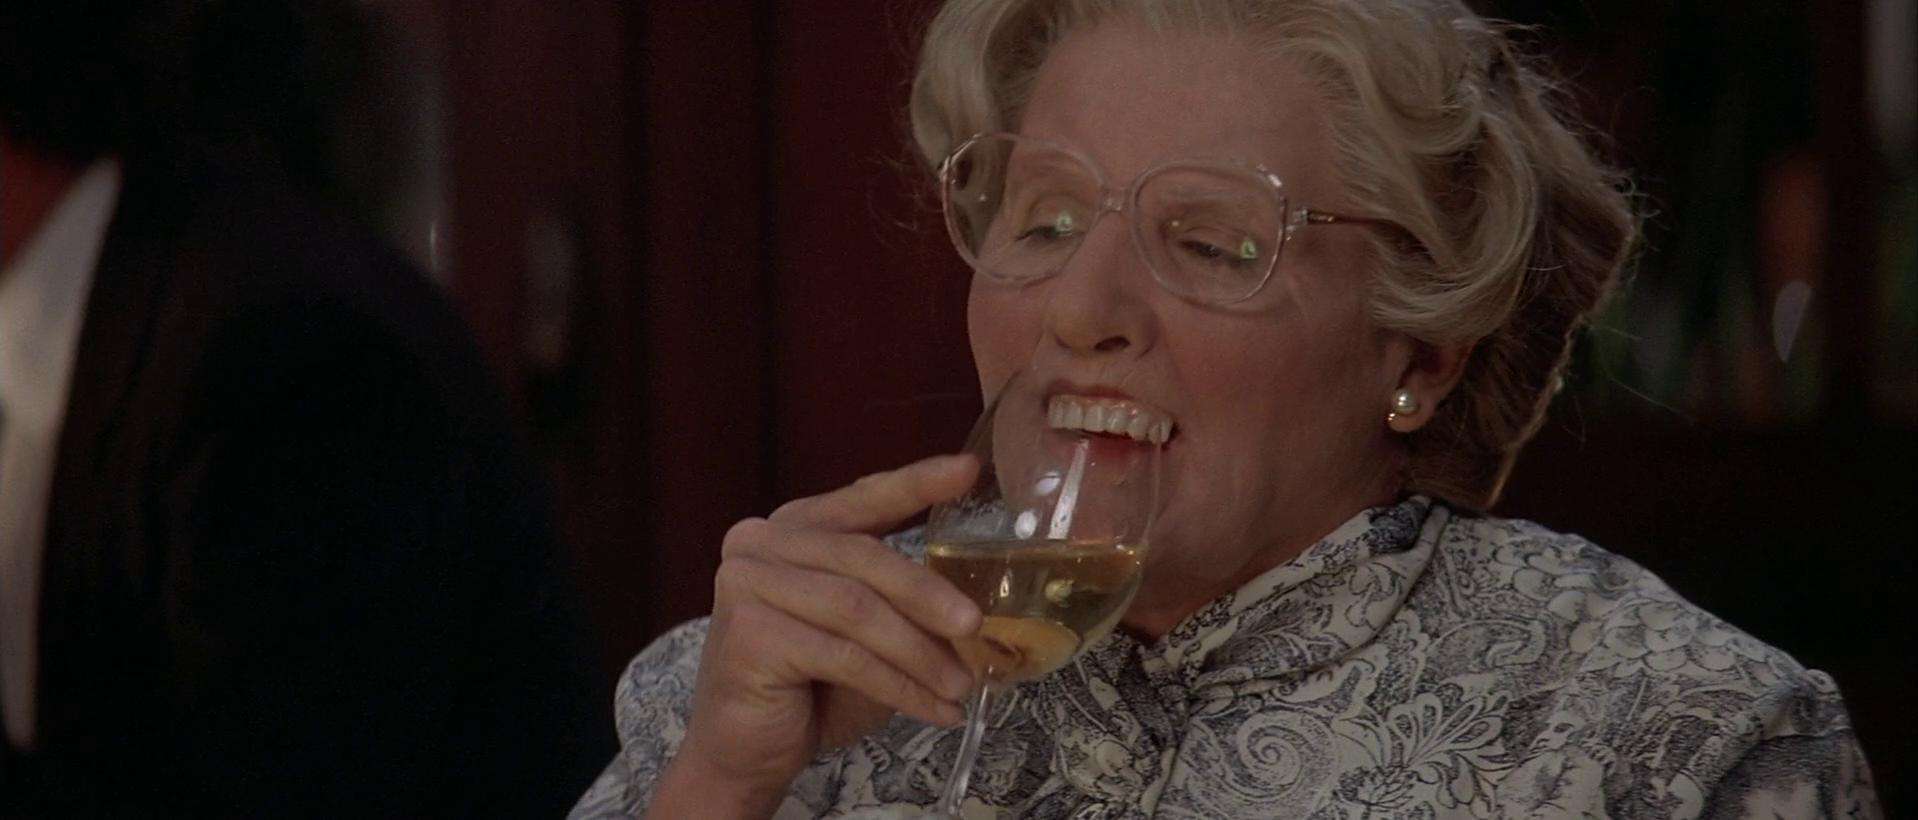 A man dressed as an old woman and drinking wine in this image from Twentieth Century Fox.